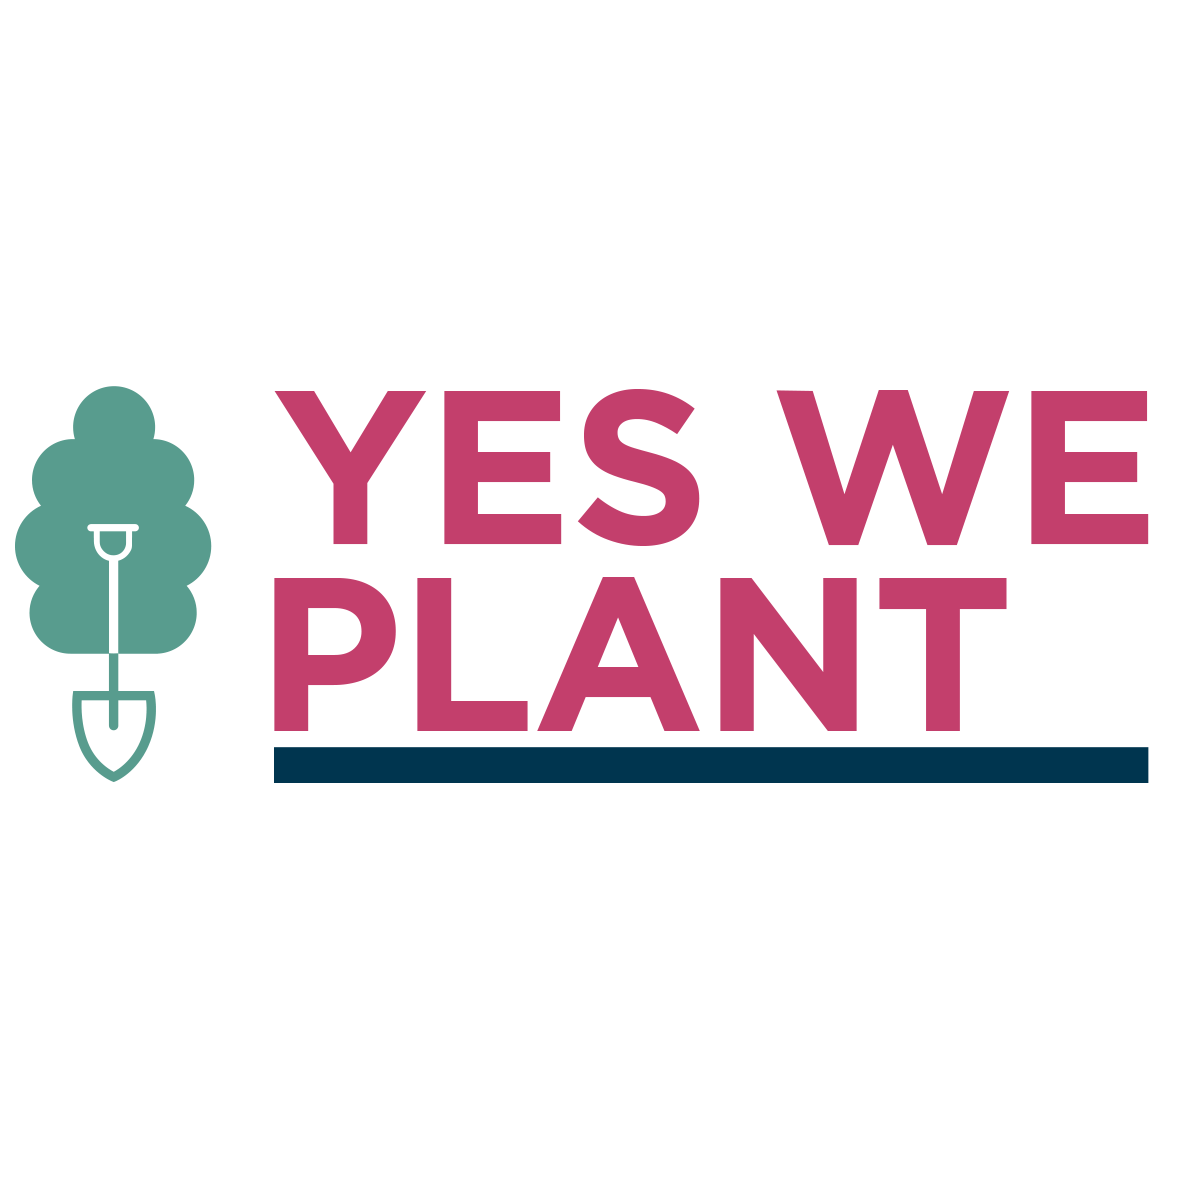 Opération "Yes we plant" 